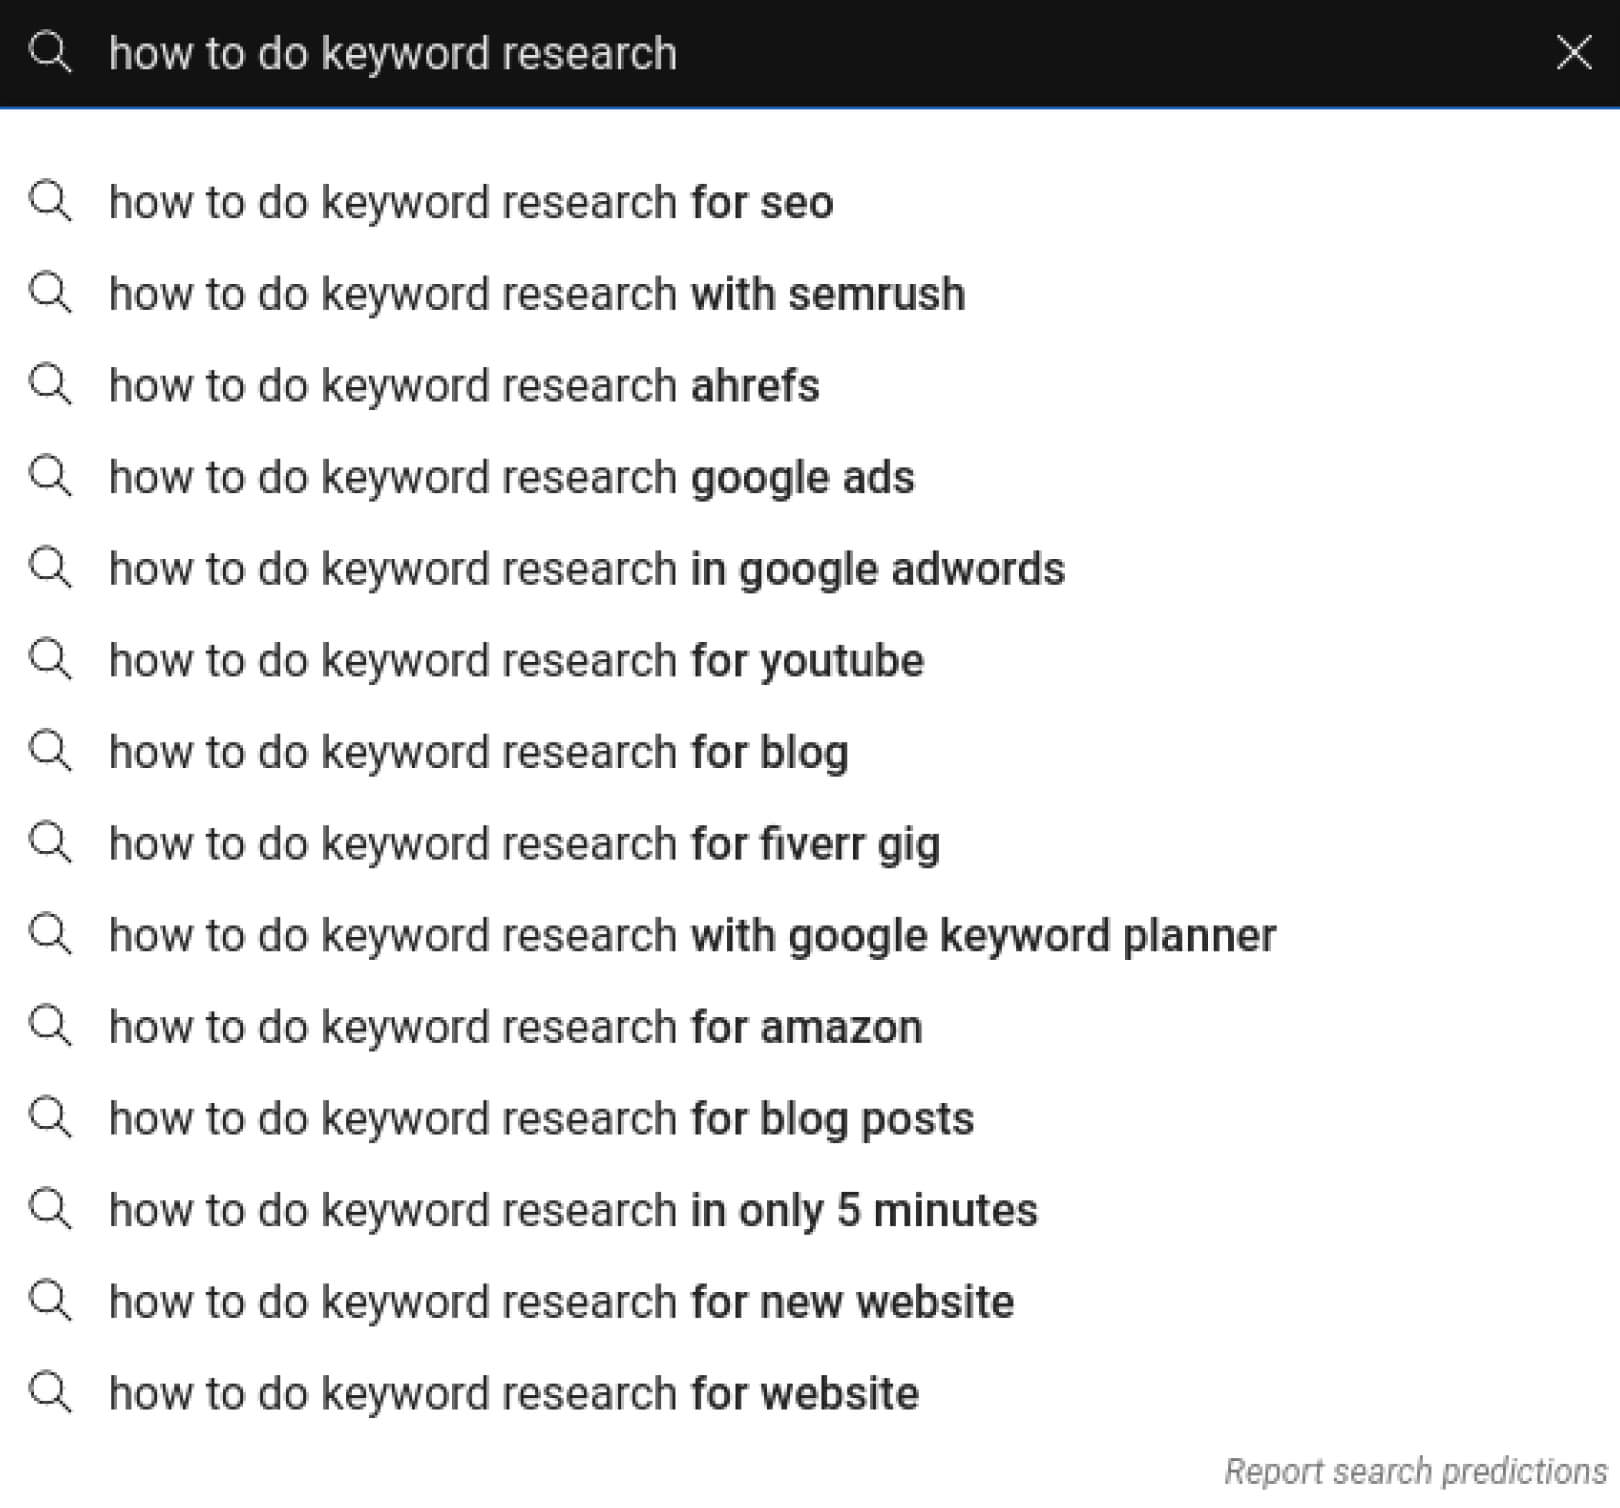 3. Conduct Keyword Research